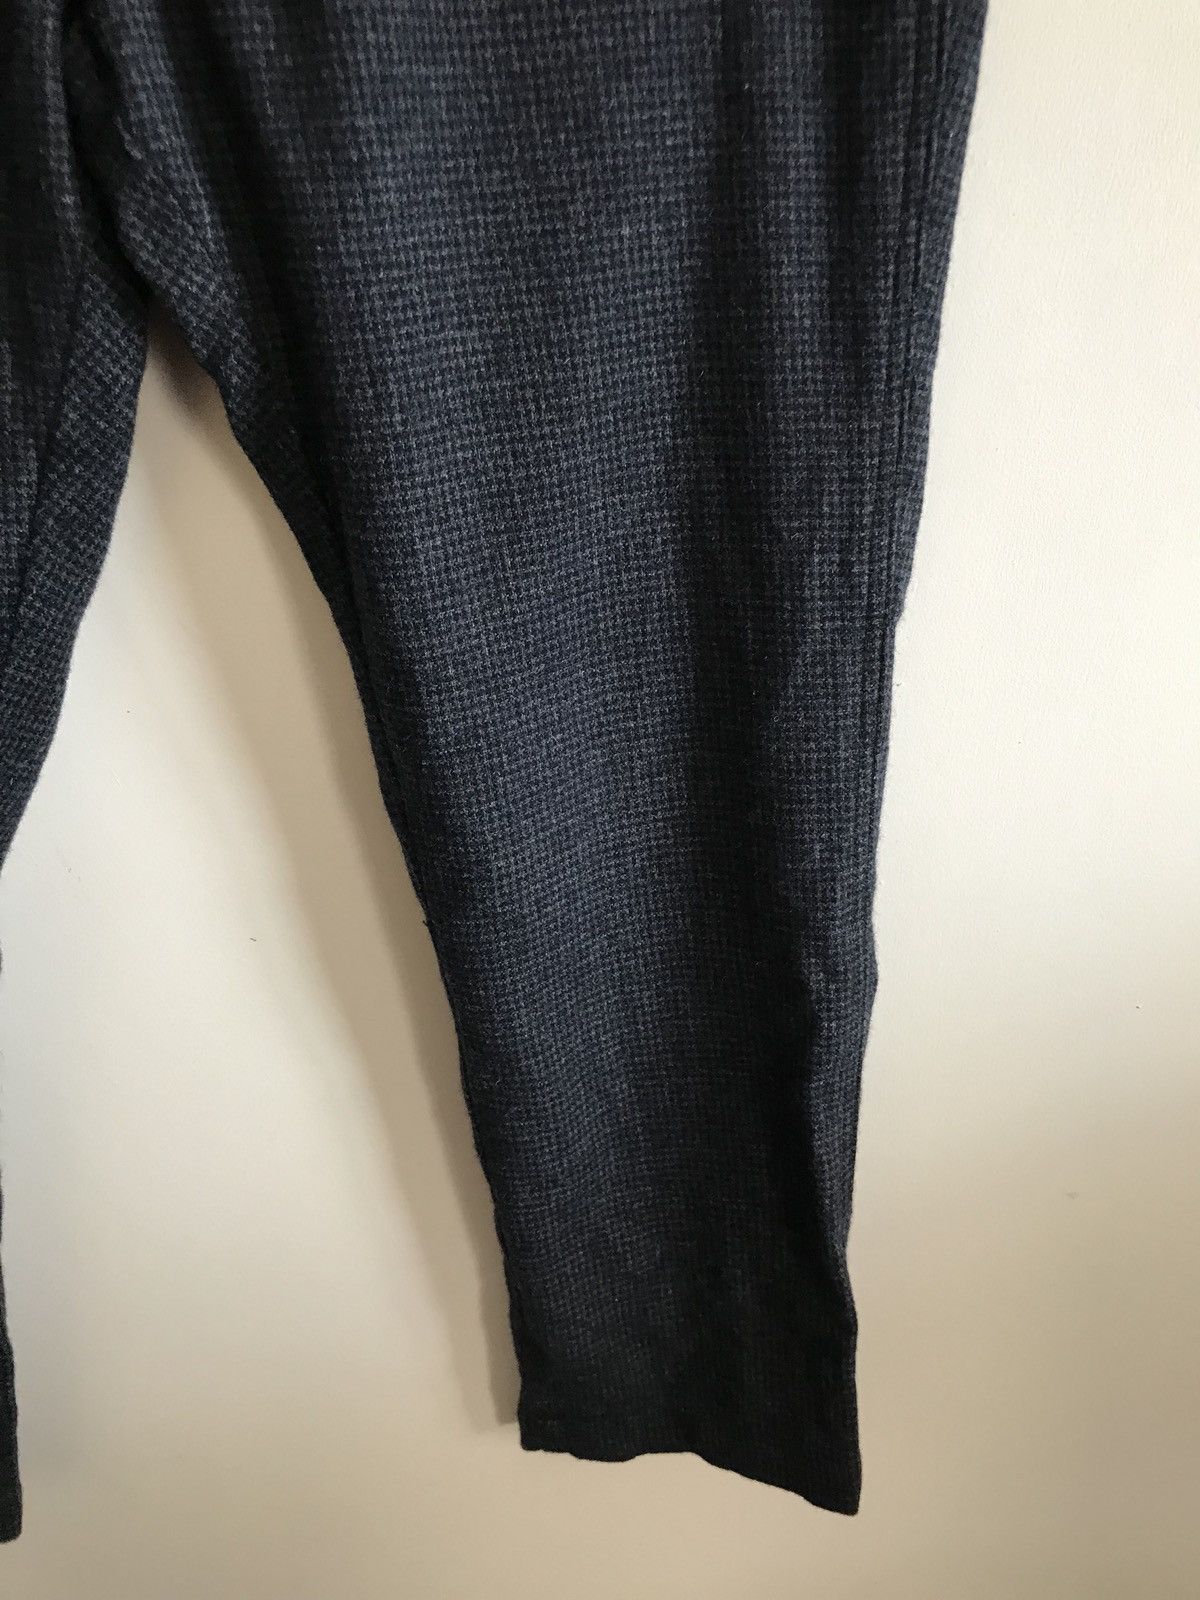 Urban Research Doors Made In Japan Urban Research Black Houndstooth Casual Pants Size US 34 / EU 50 - 5 Thumbnail